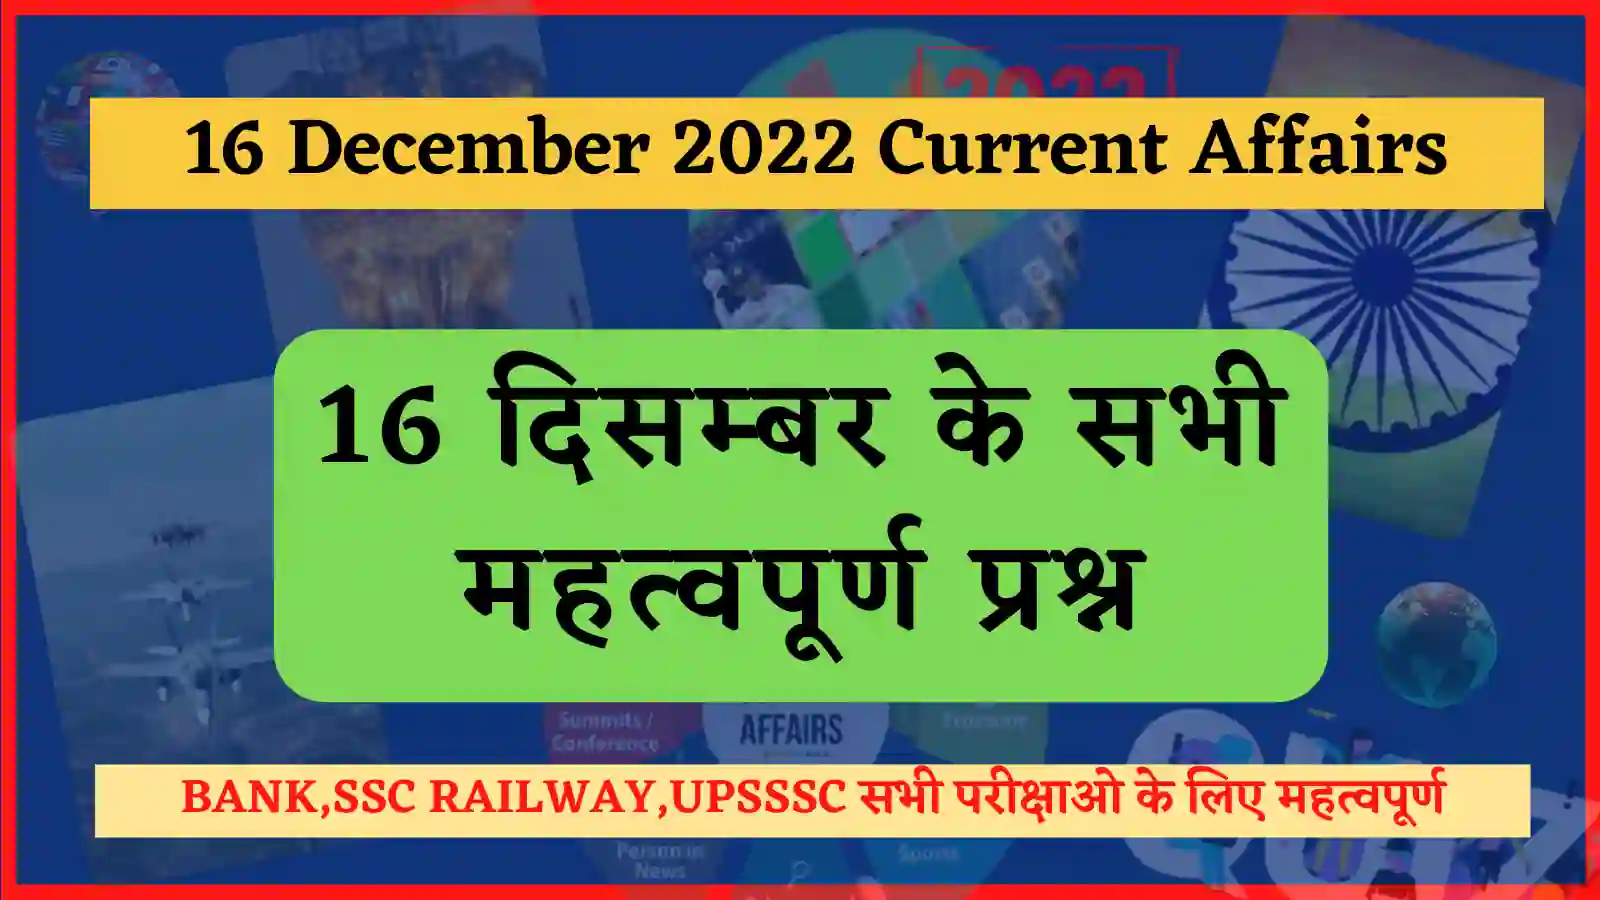 16 December 2022 Current Affairs in Hindi